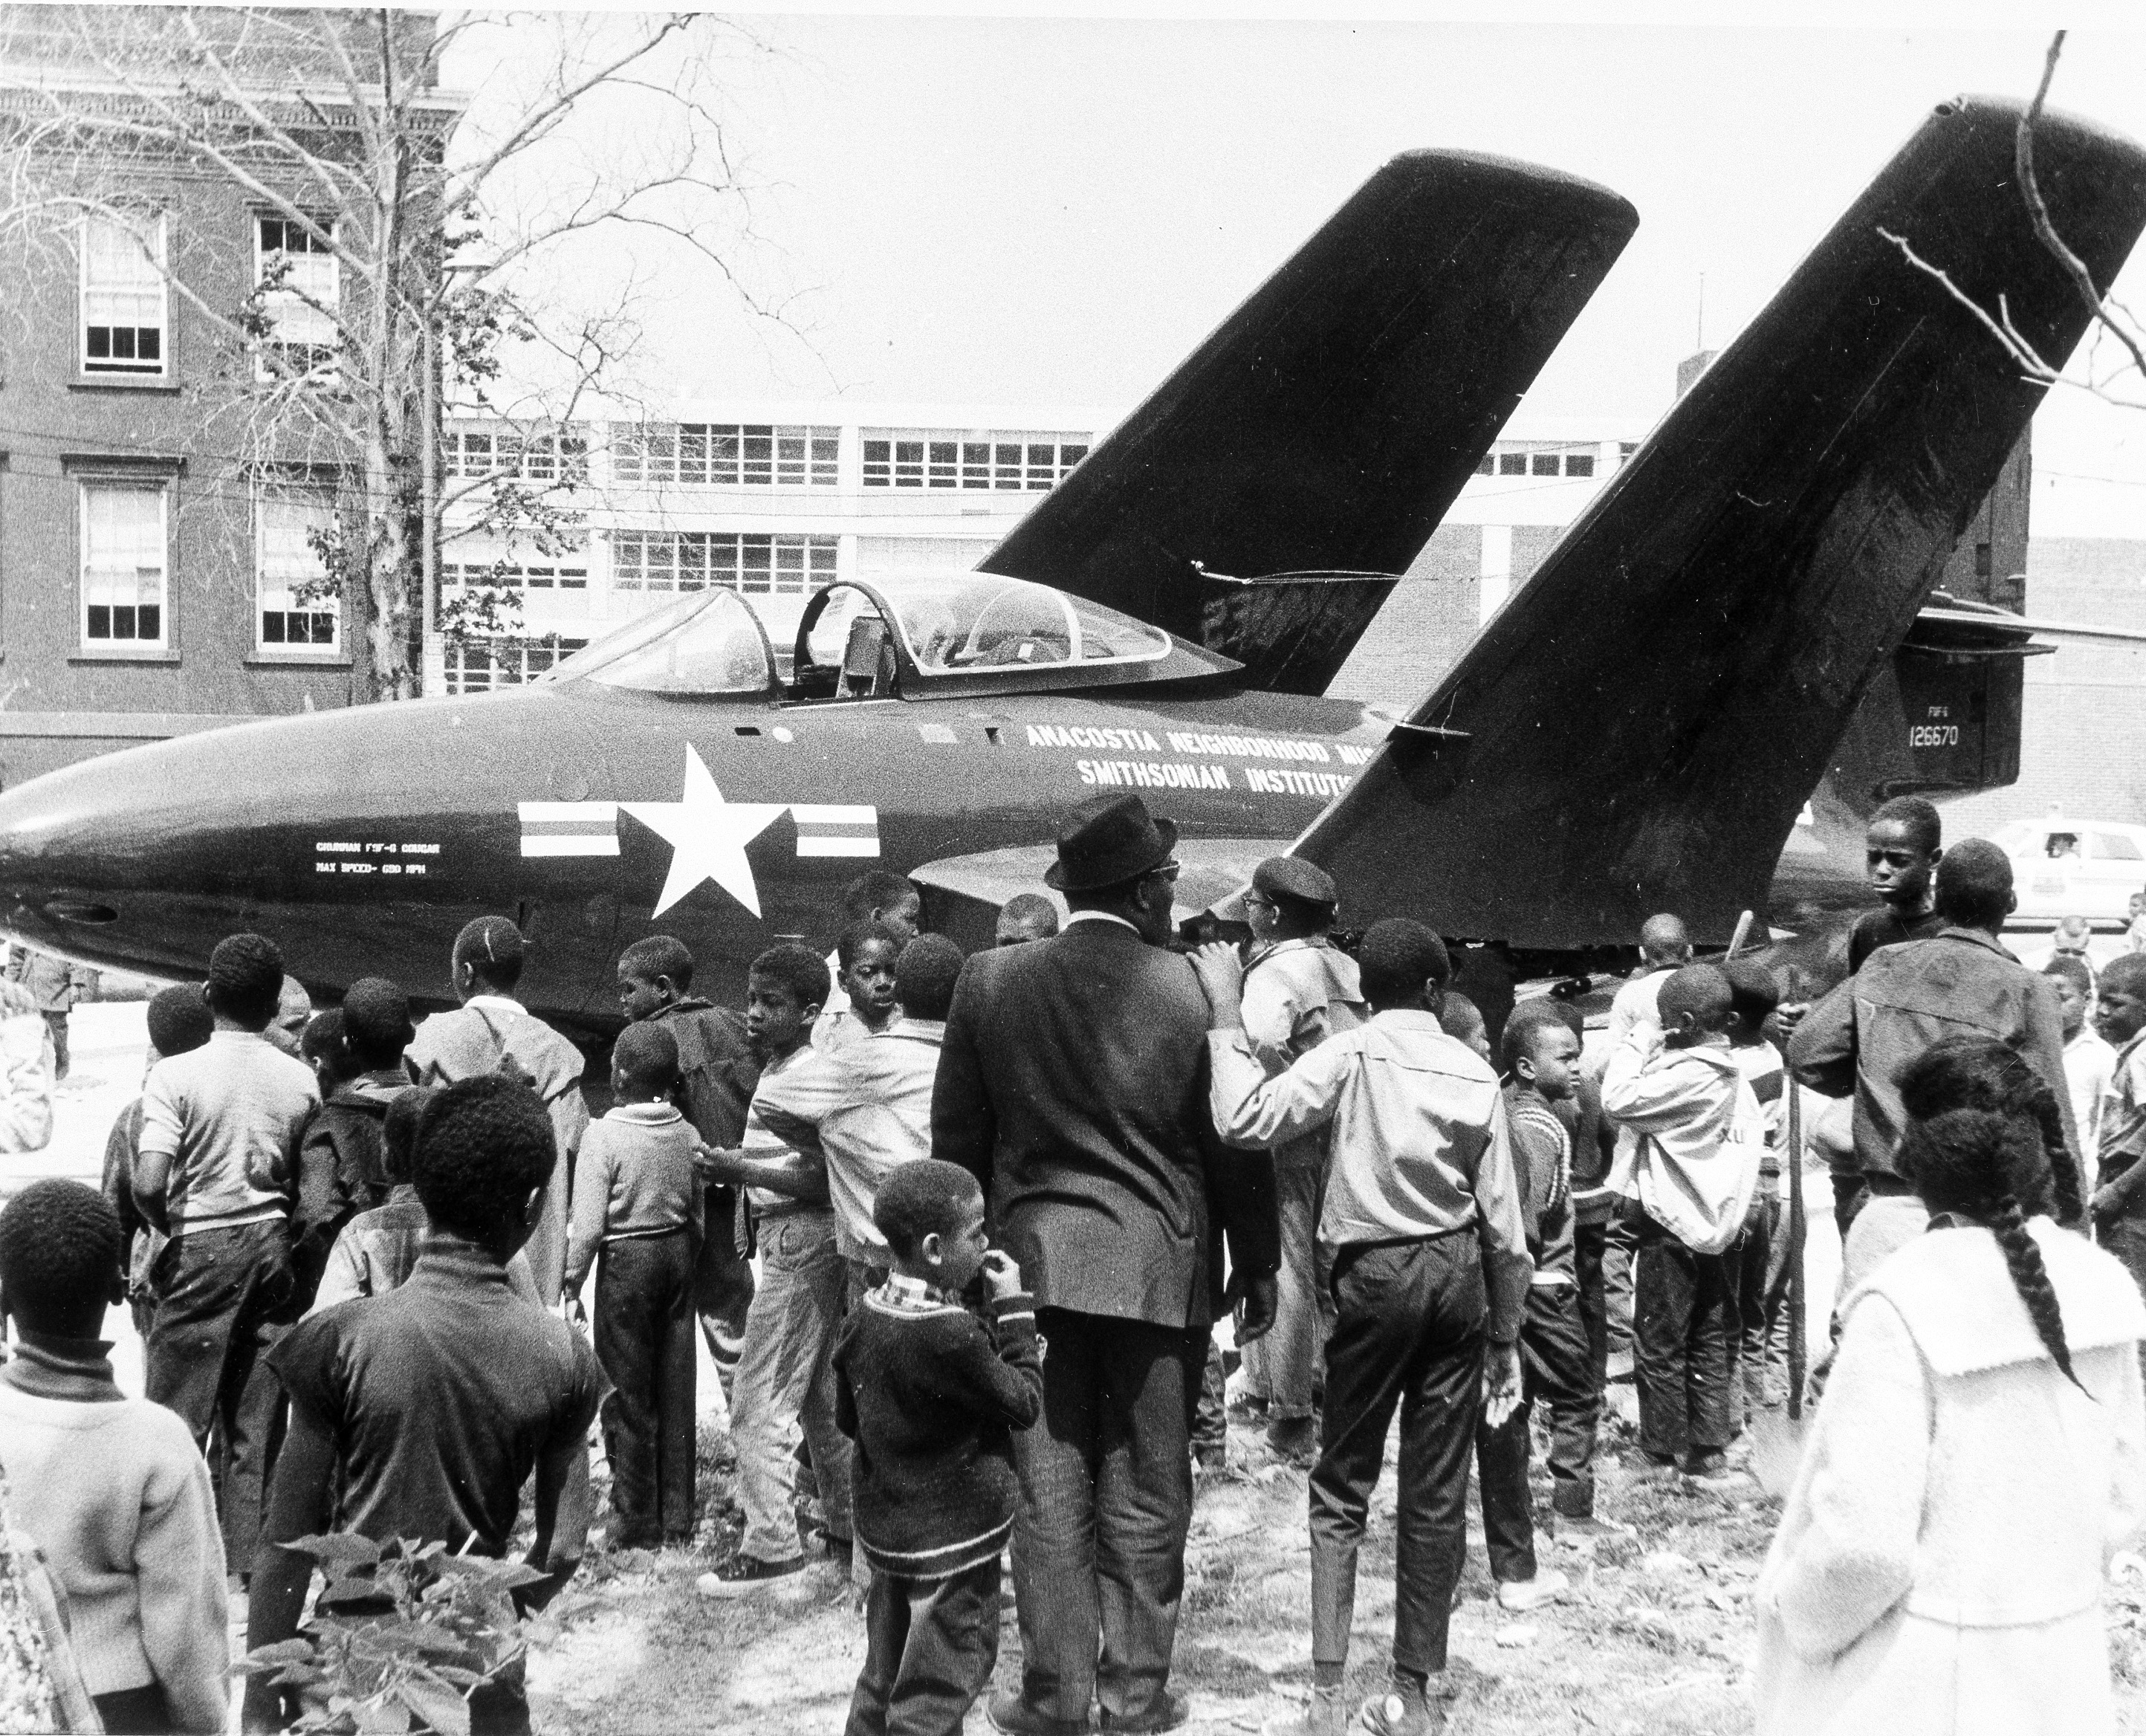 Black and white photograph of airplane with crowd around it.